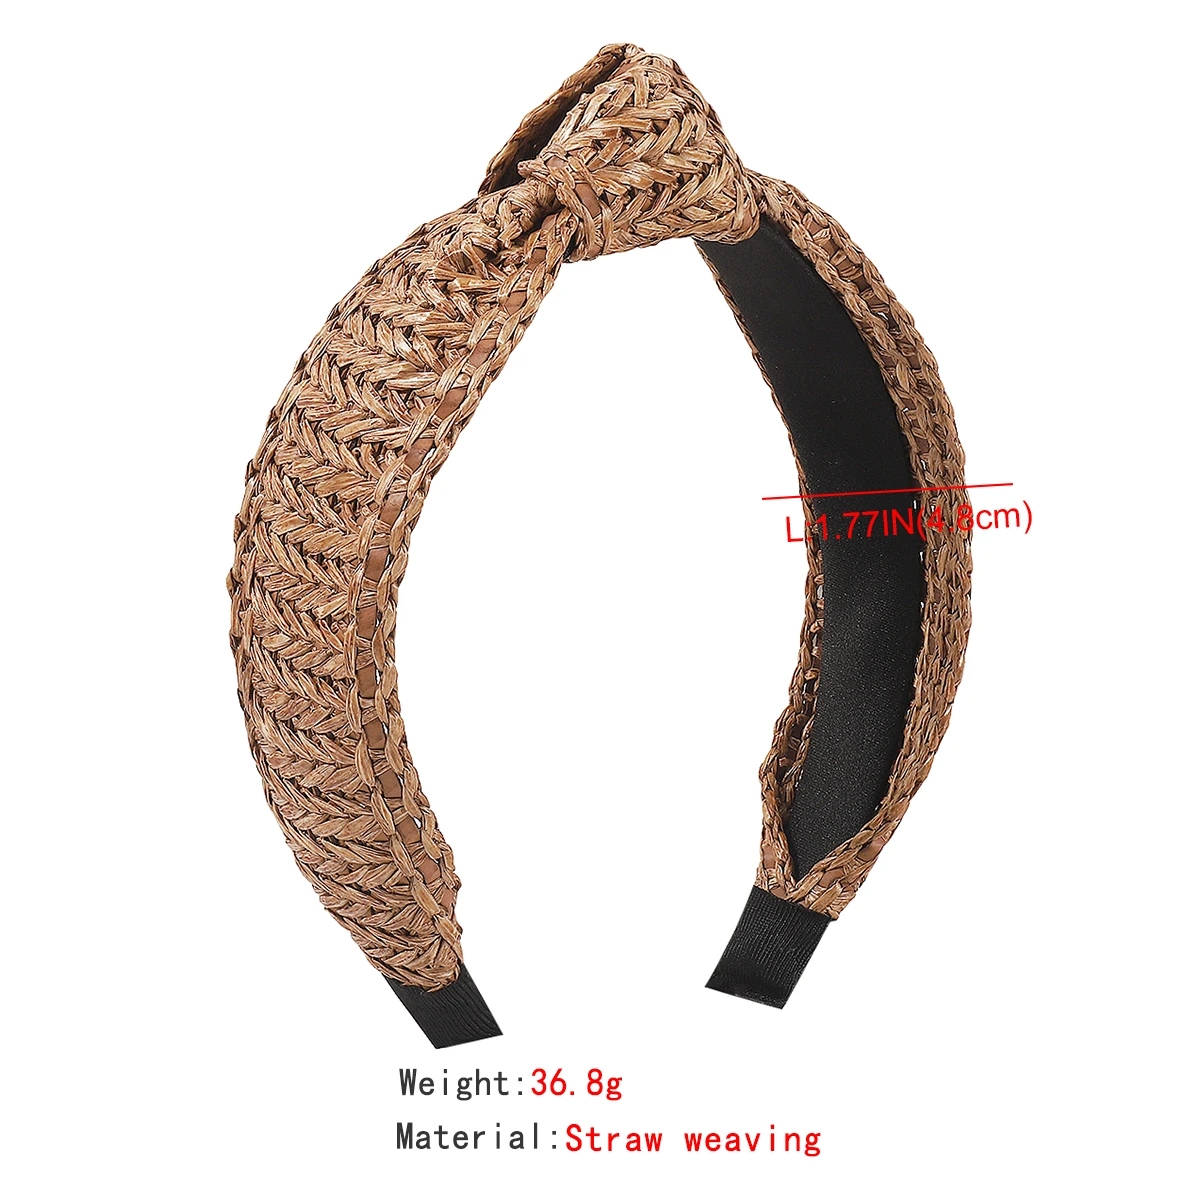 Bohemian Top Knot Headband Braided Straw Weaving Center Knotted Hairbands Tiara Hair Accessories For Women Adult Jewelry